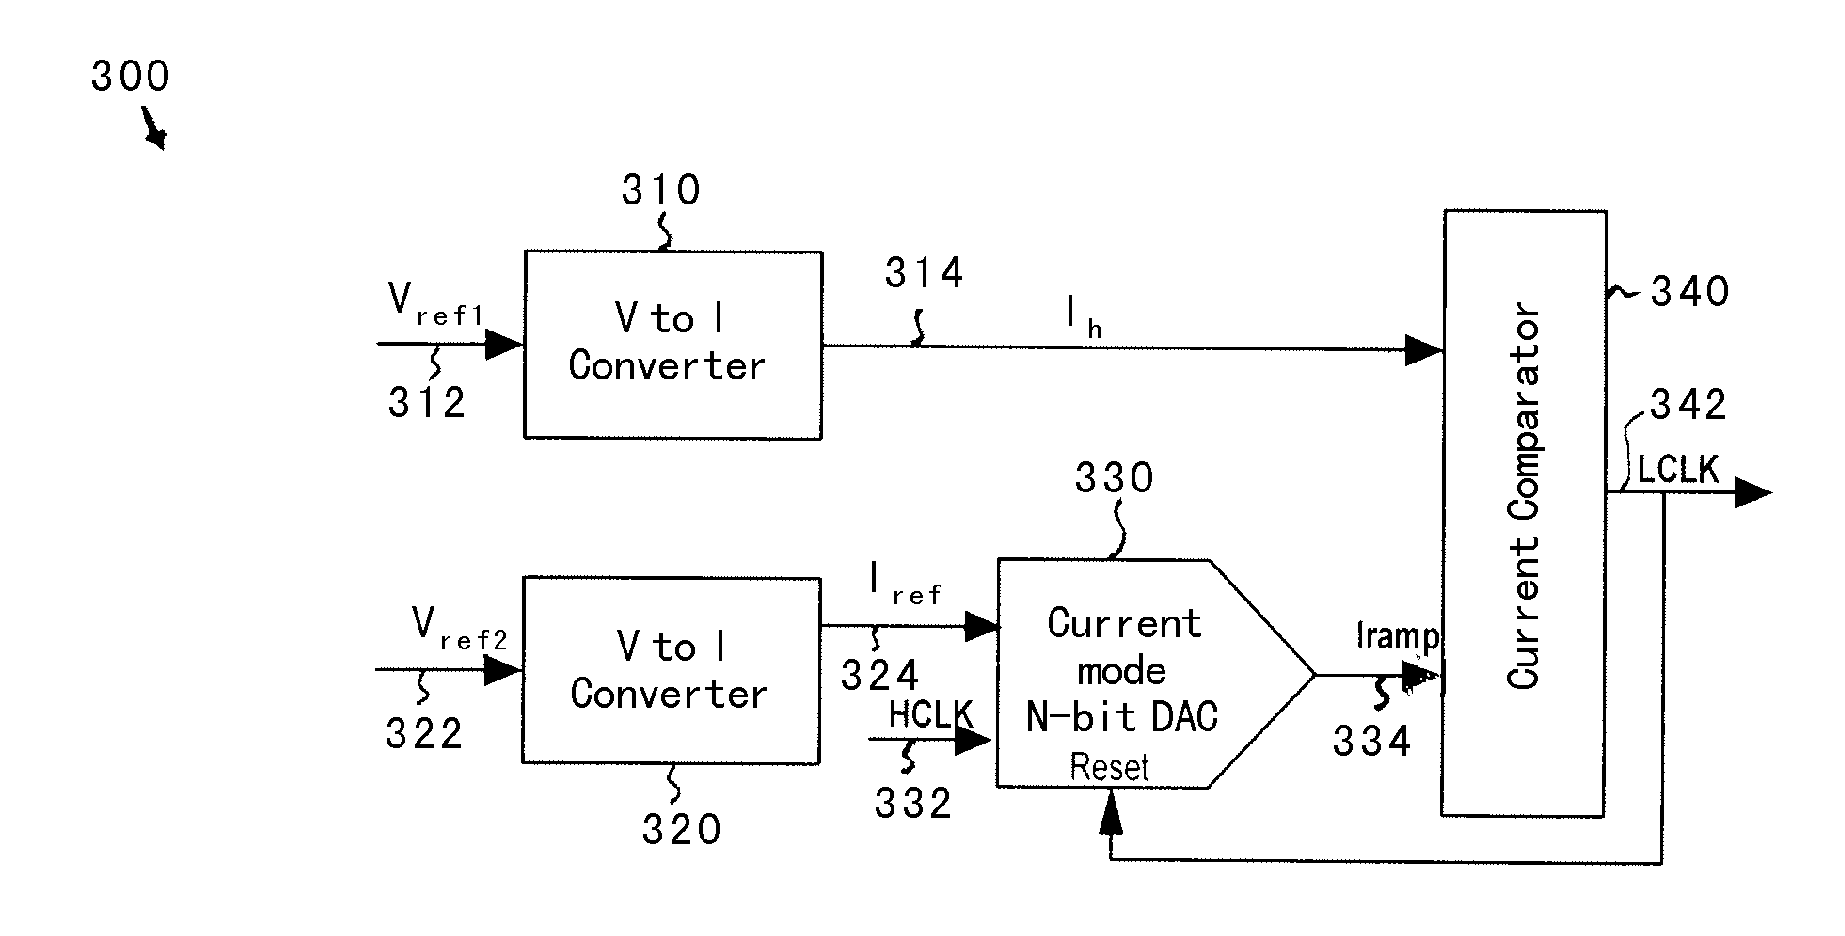 Low frequency oscillator for burst-mode dimming control for ccfl driver system